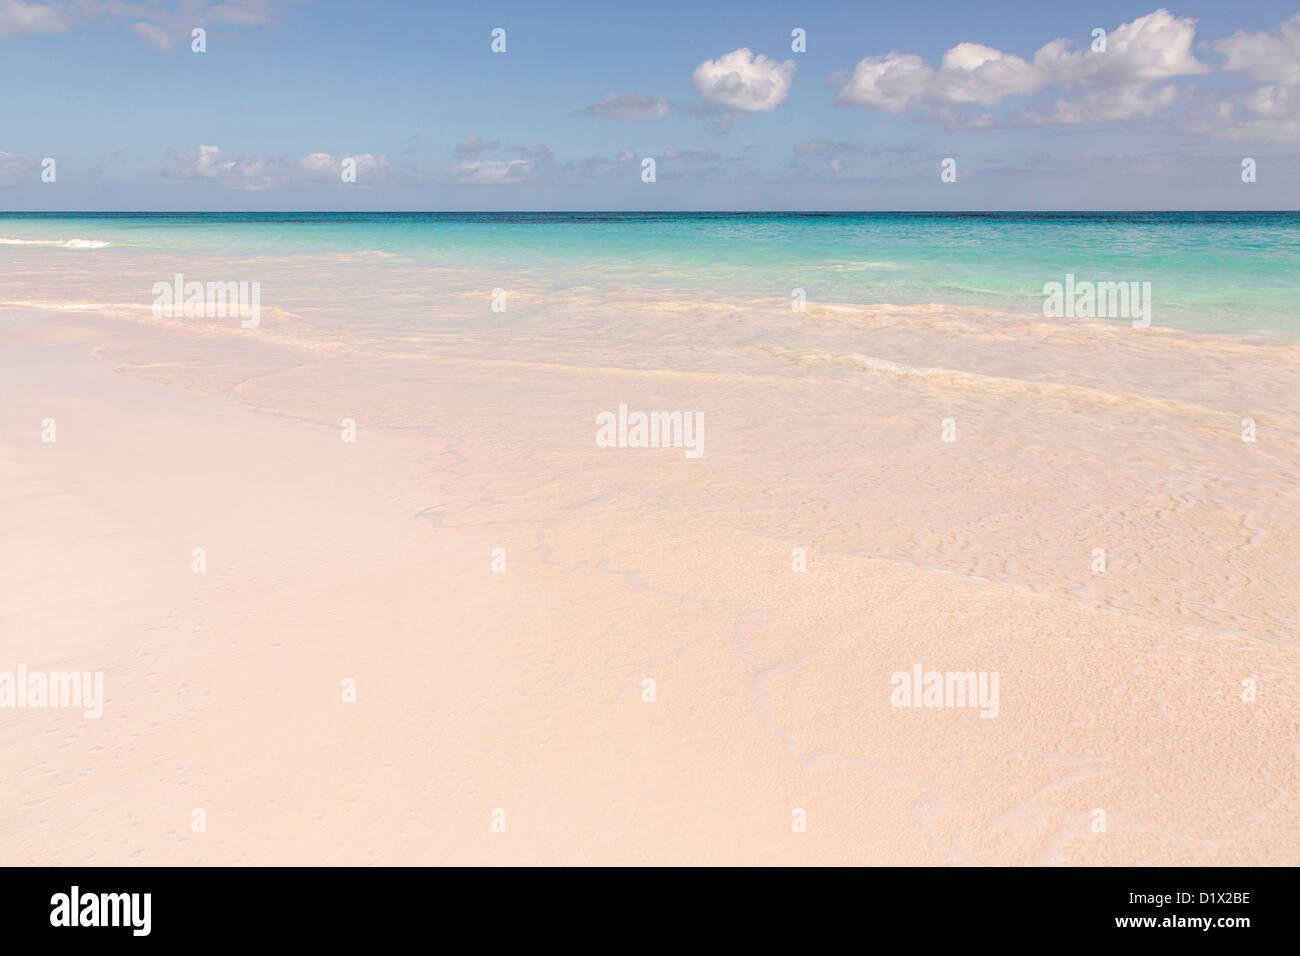 The pink sands beach in Dunmore Town, Harbour Island, The Bahamas Stock Photo